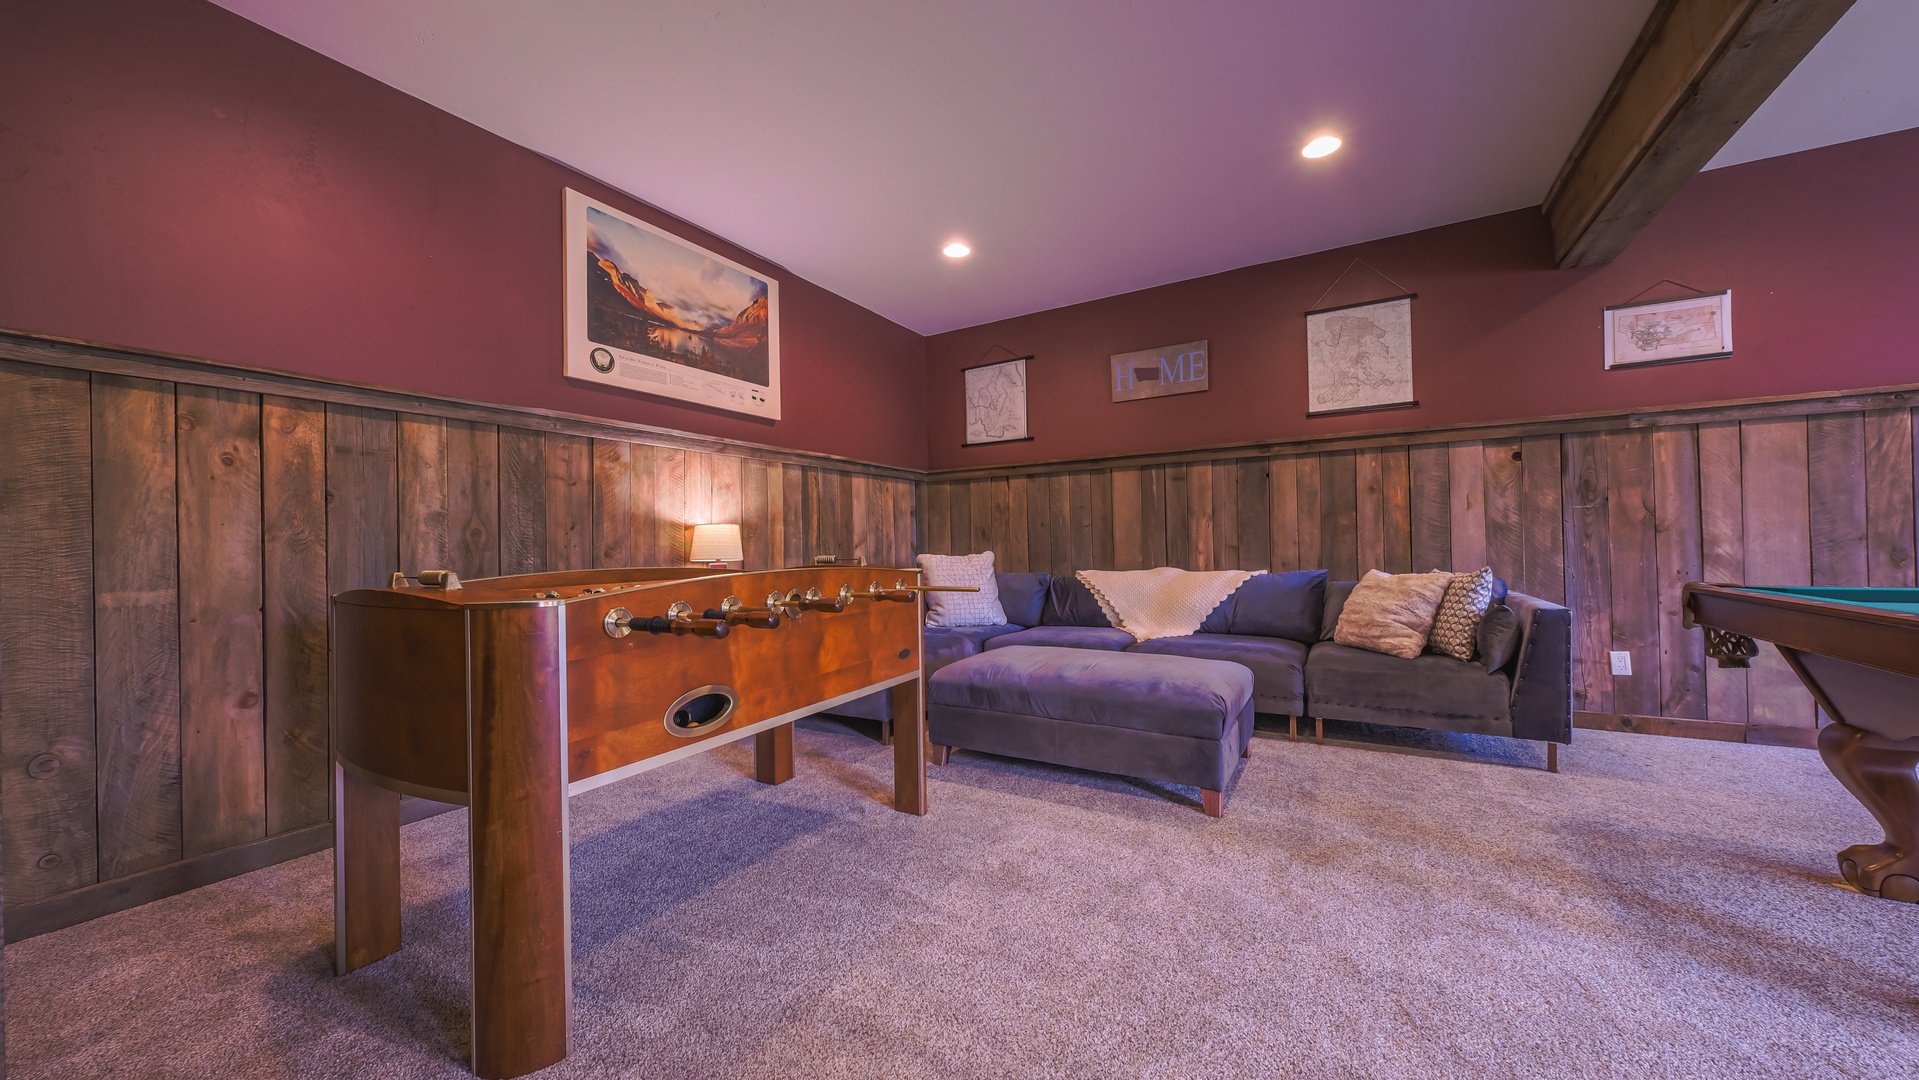 Basement game room with foosball, pool table and murphy bed